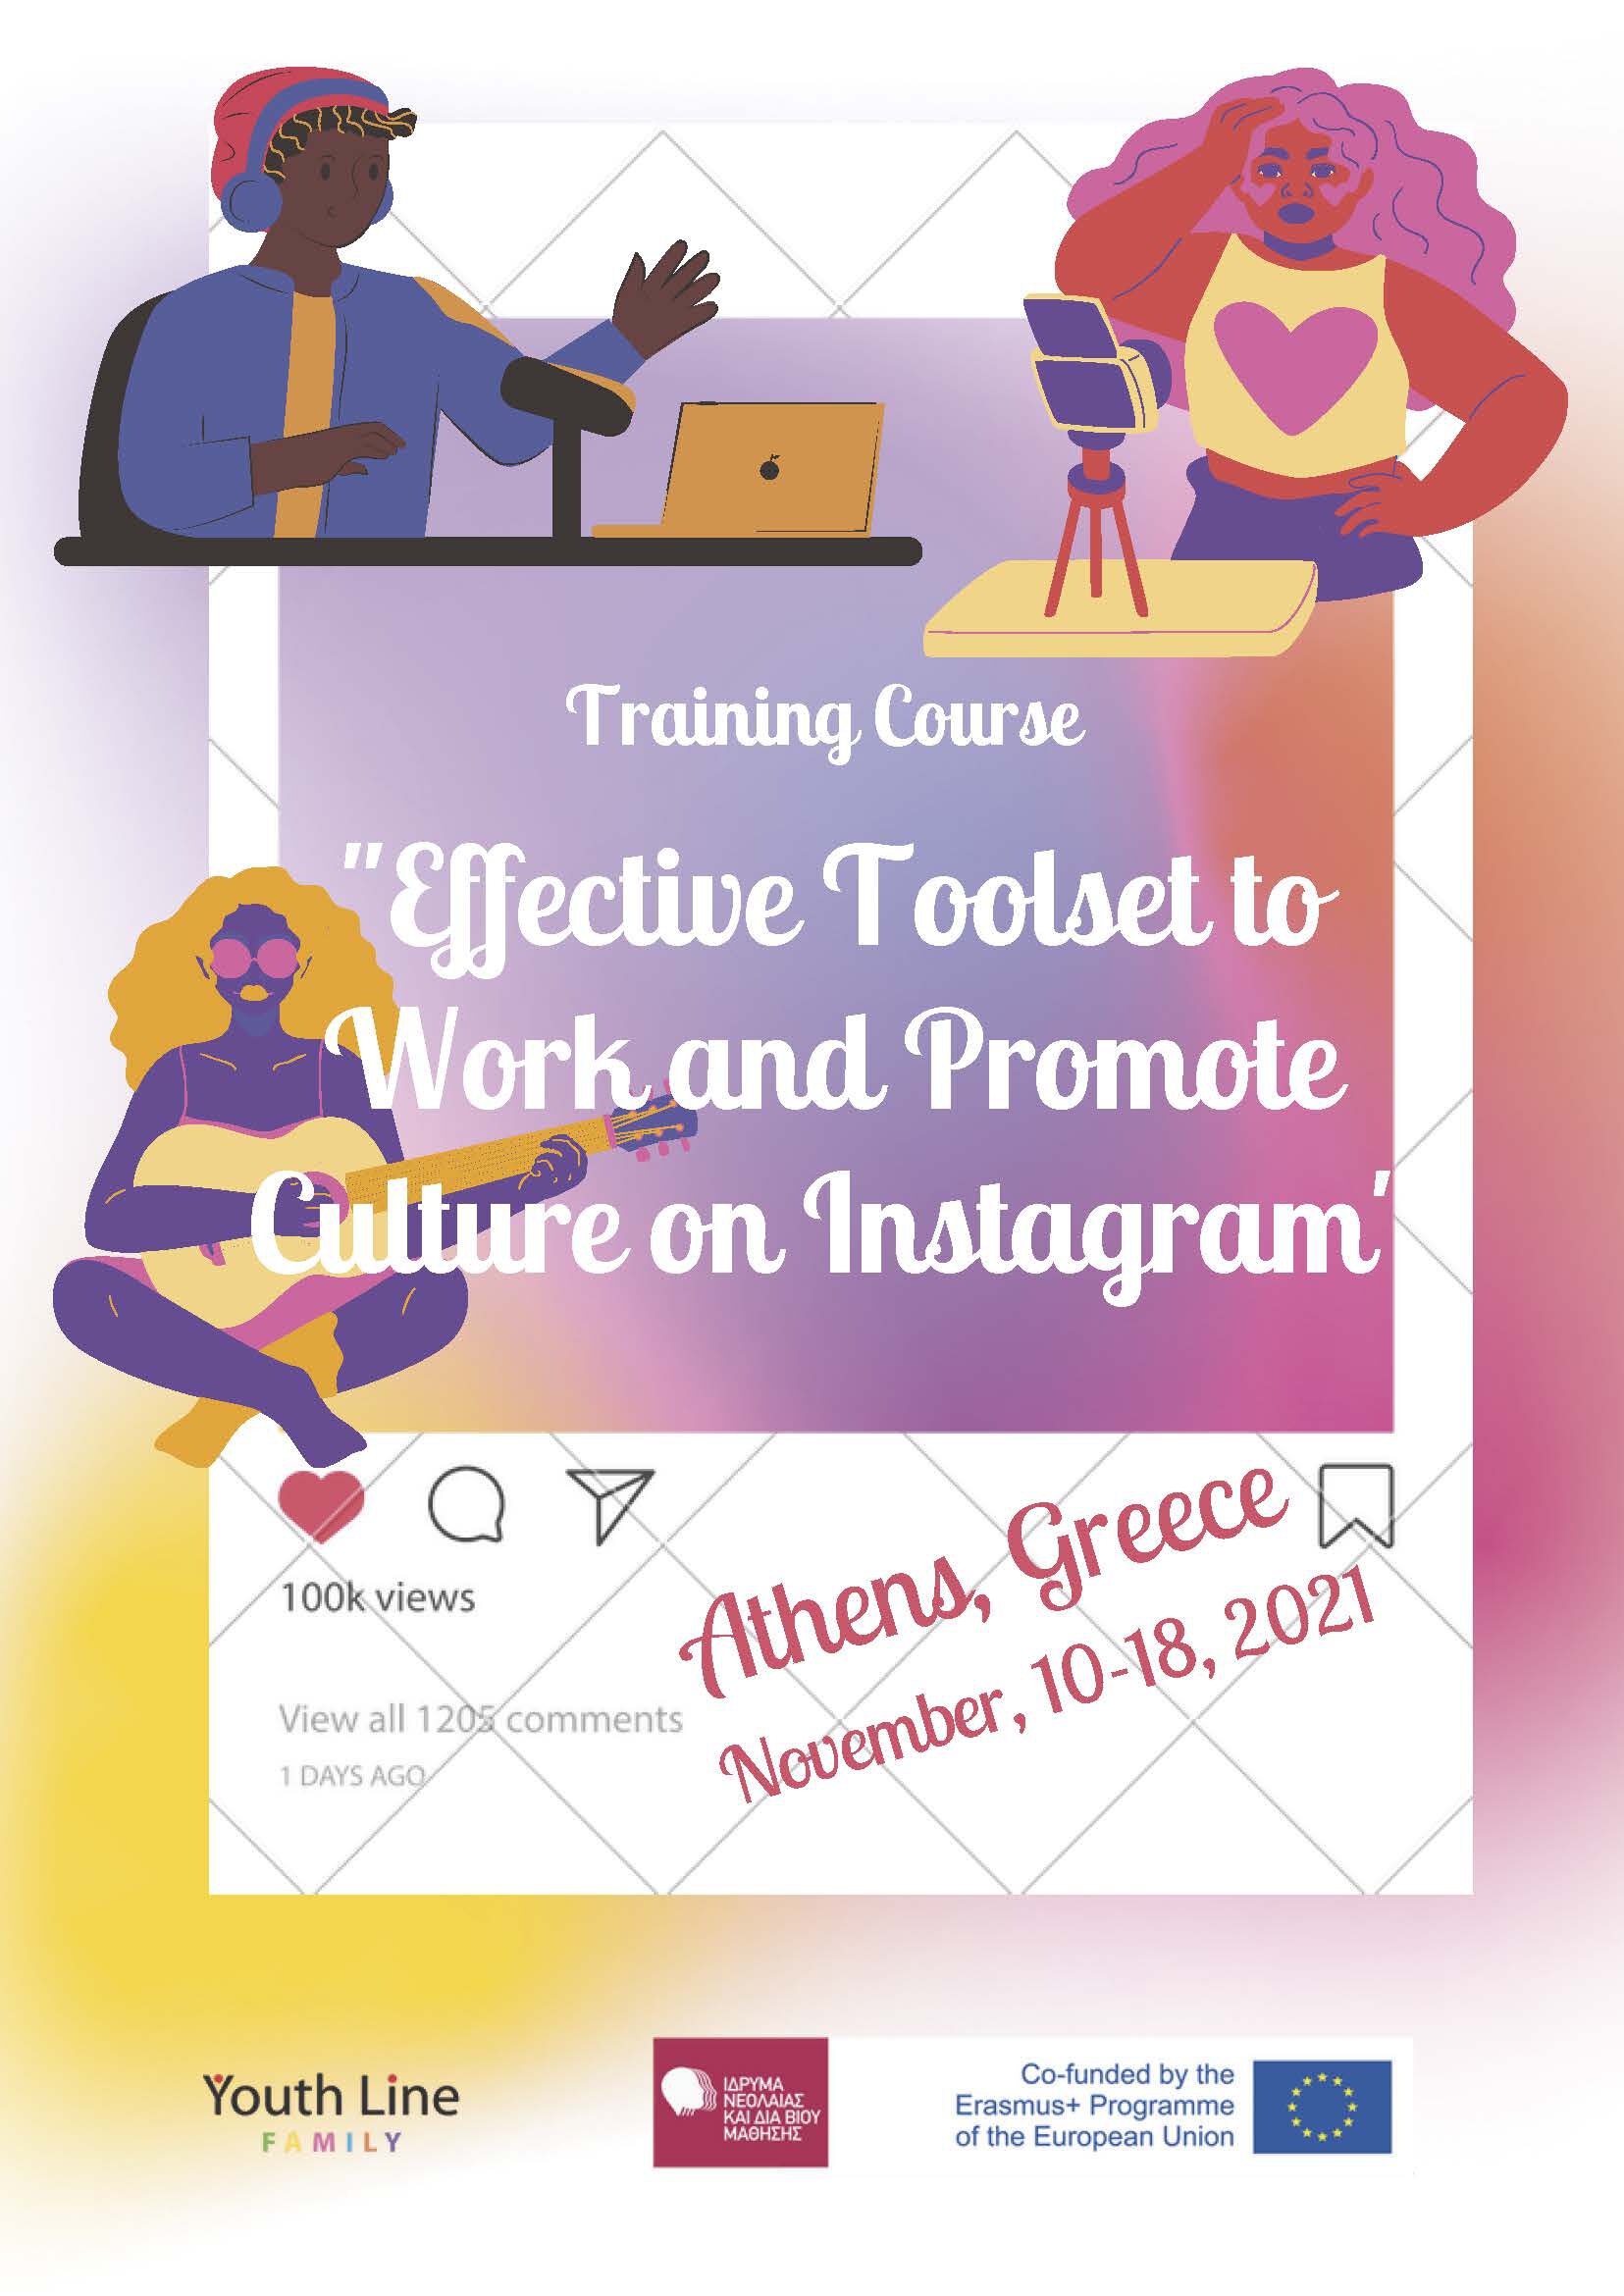 Effective Toolset to Work and Promote Culture on Instagram